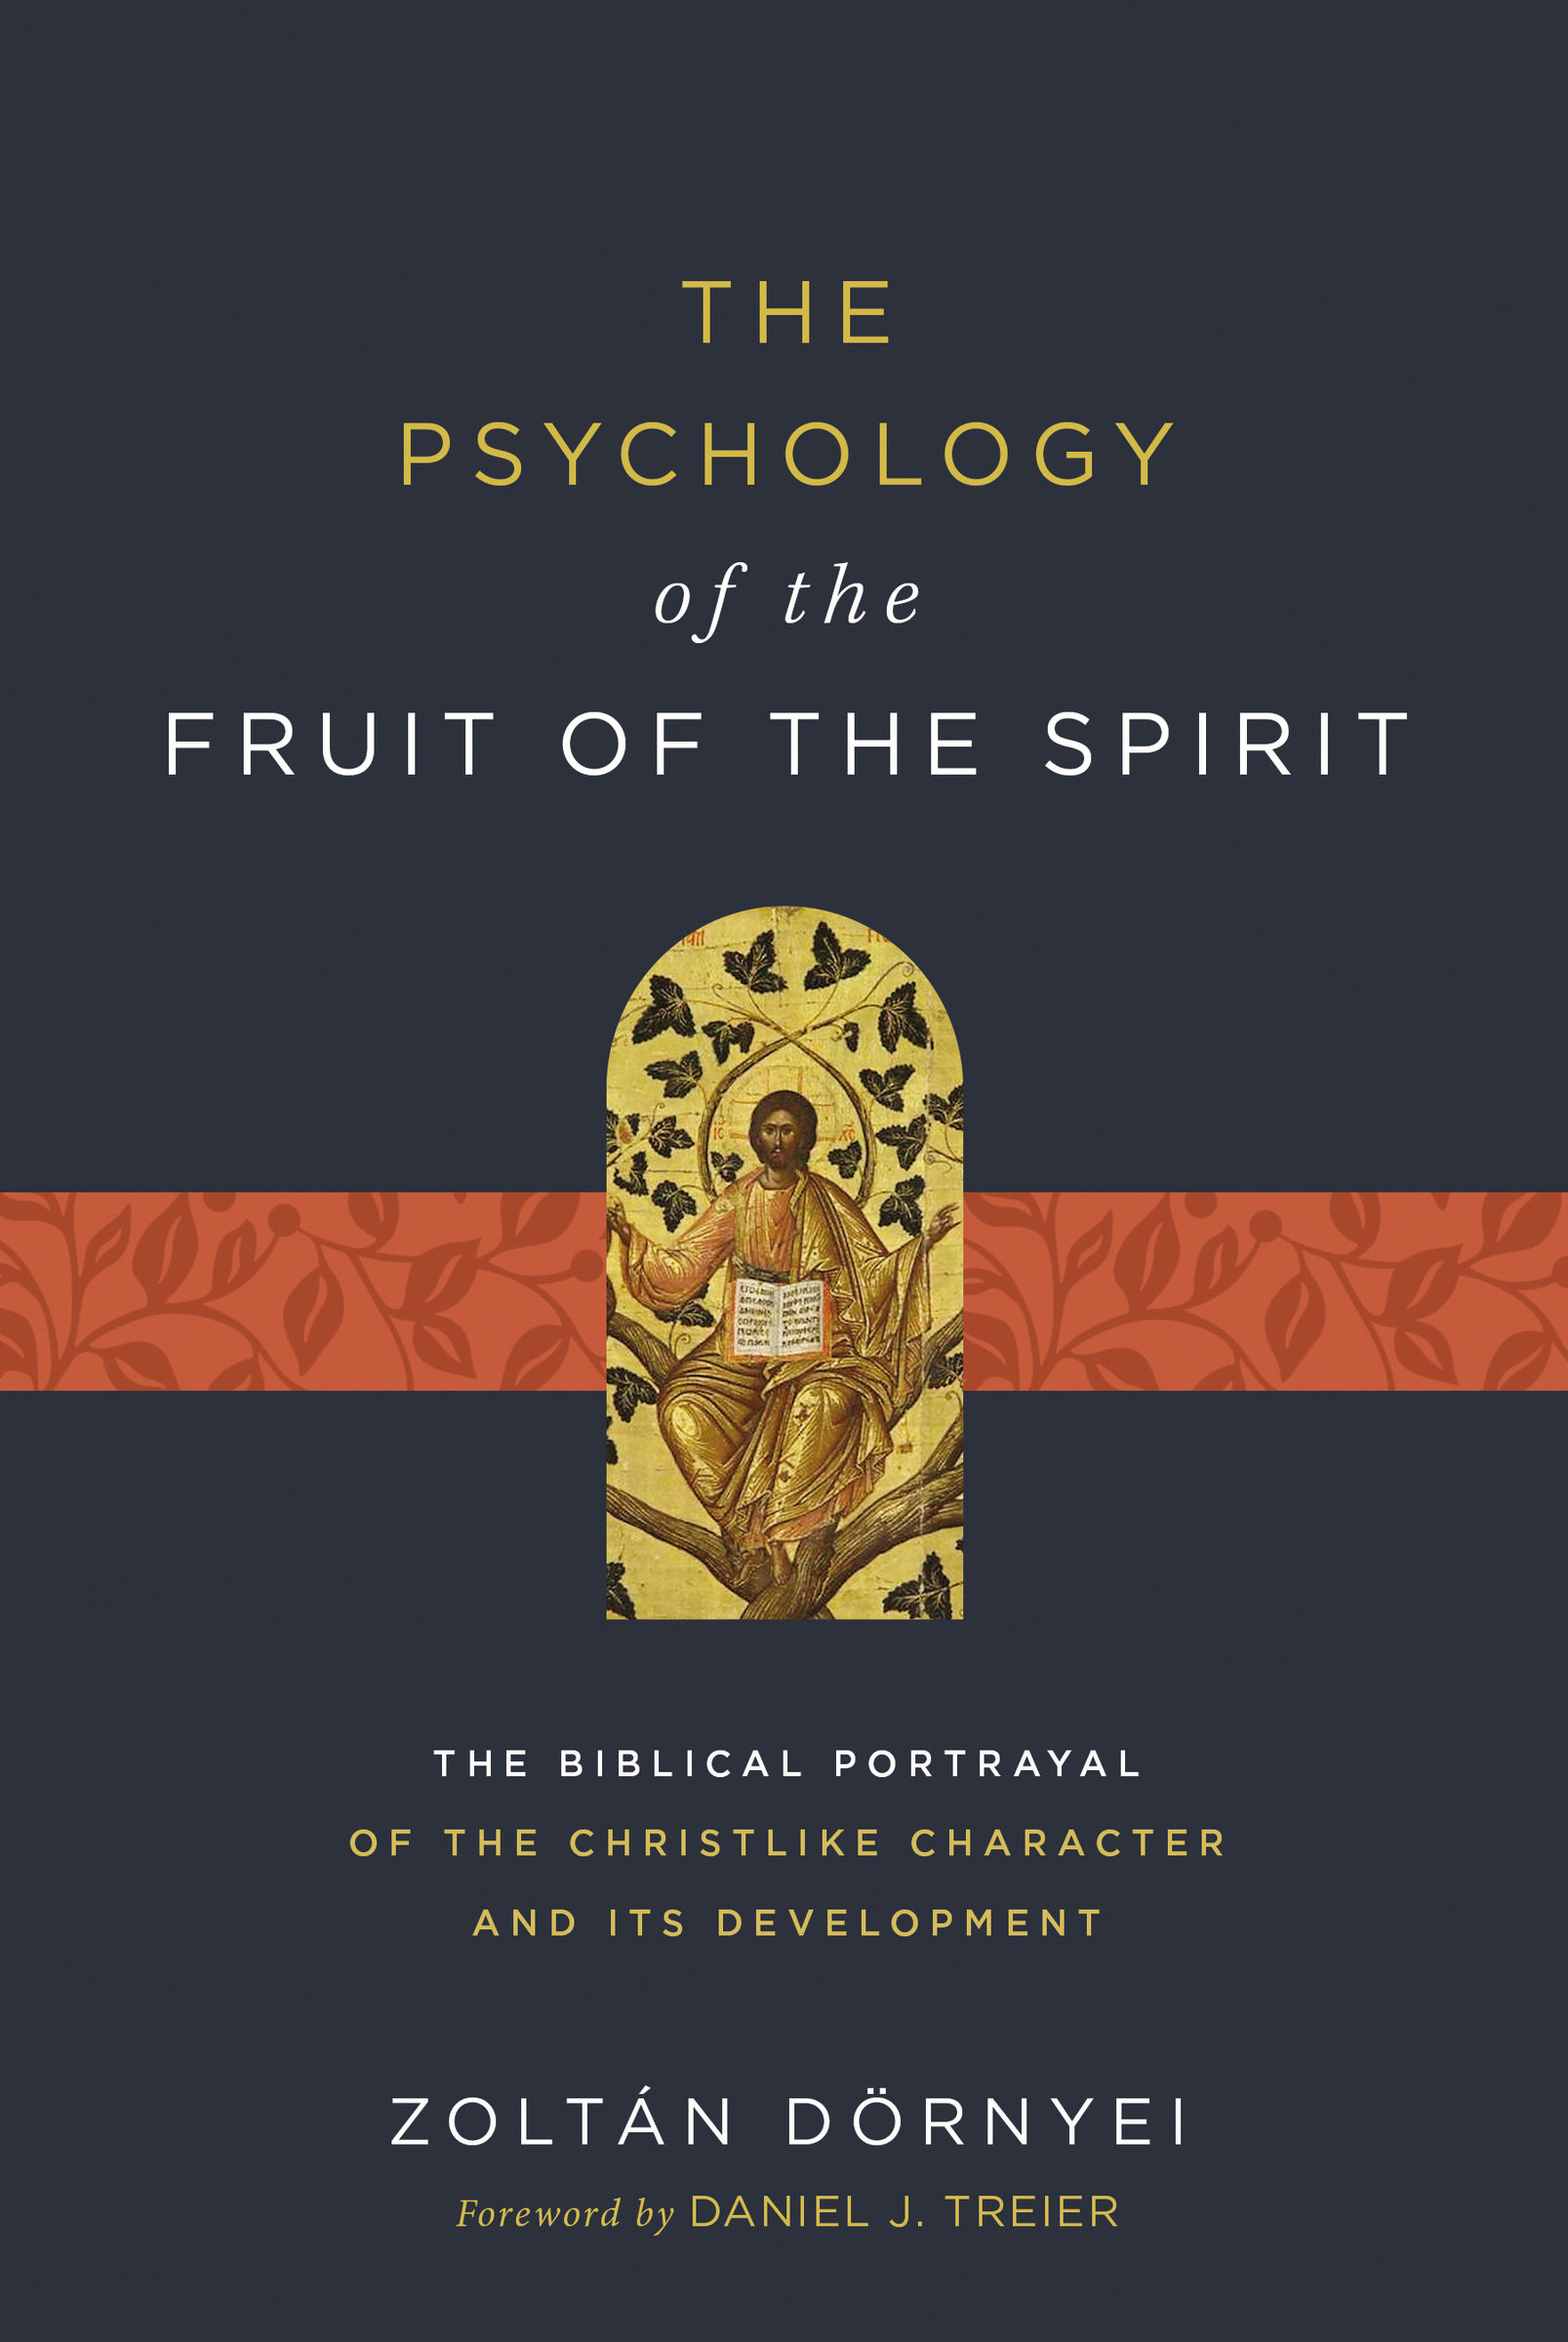 The Psychology of the Fruit of the Spirit